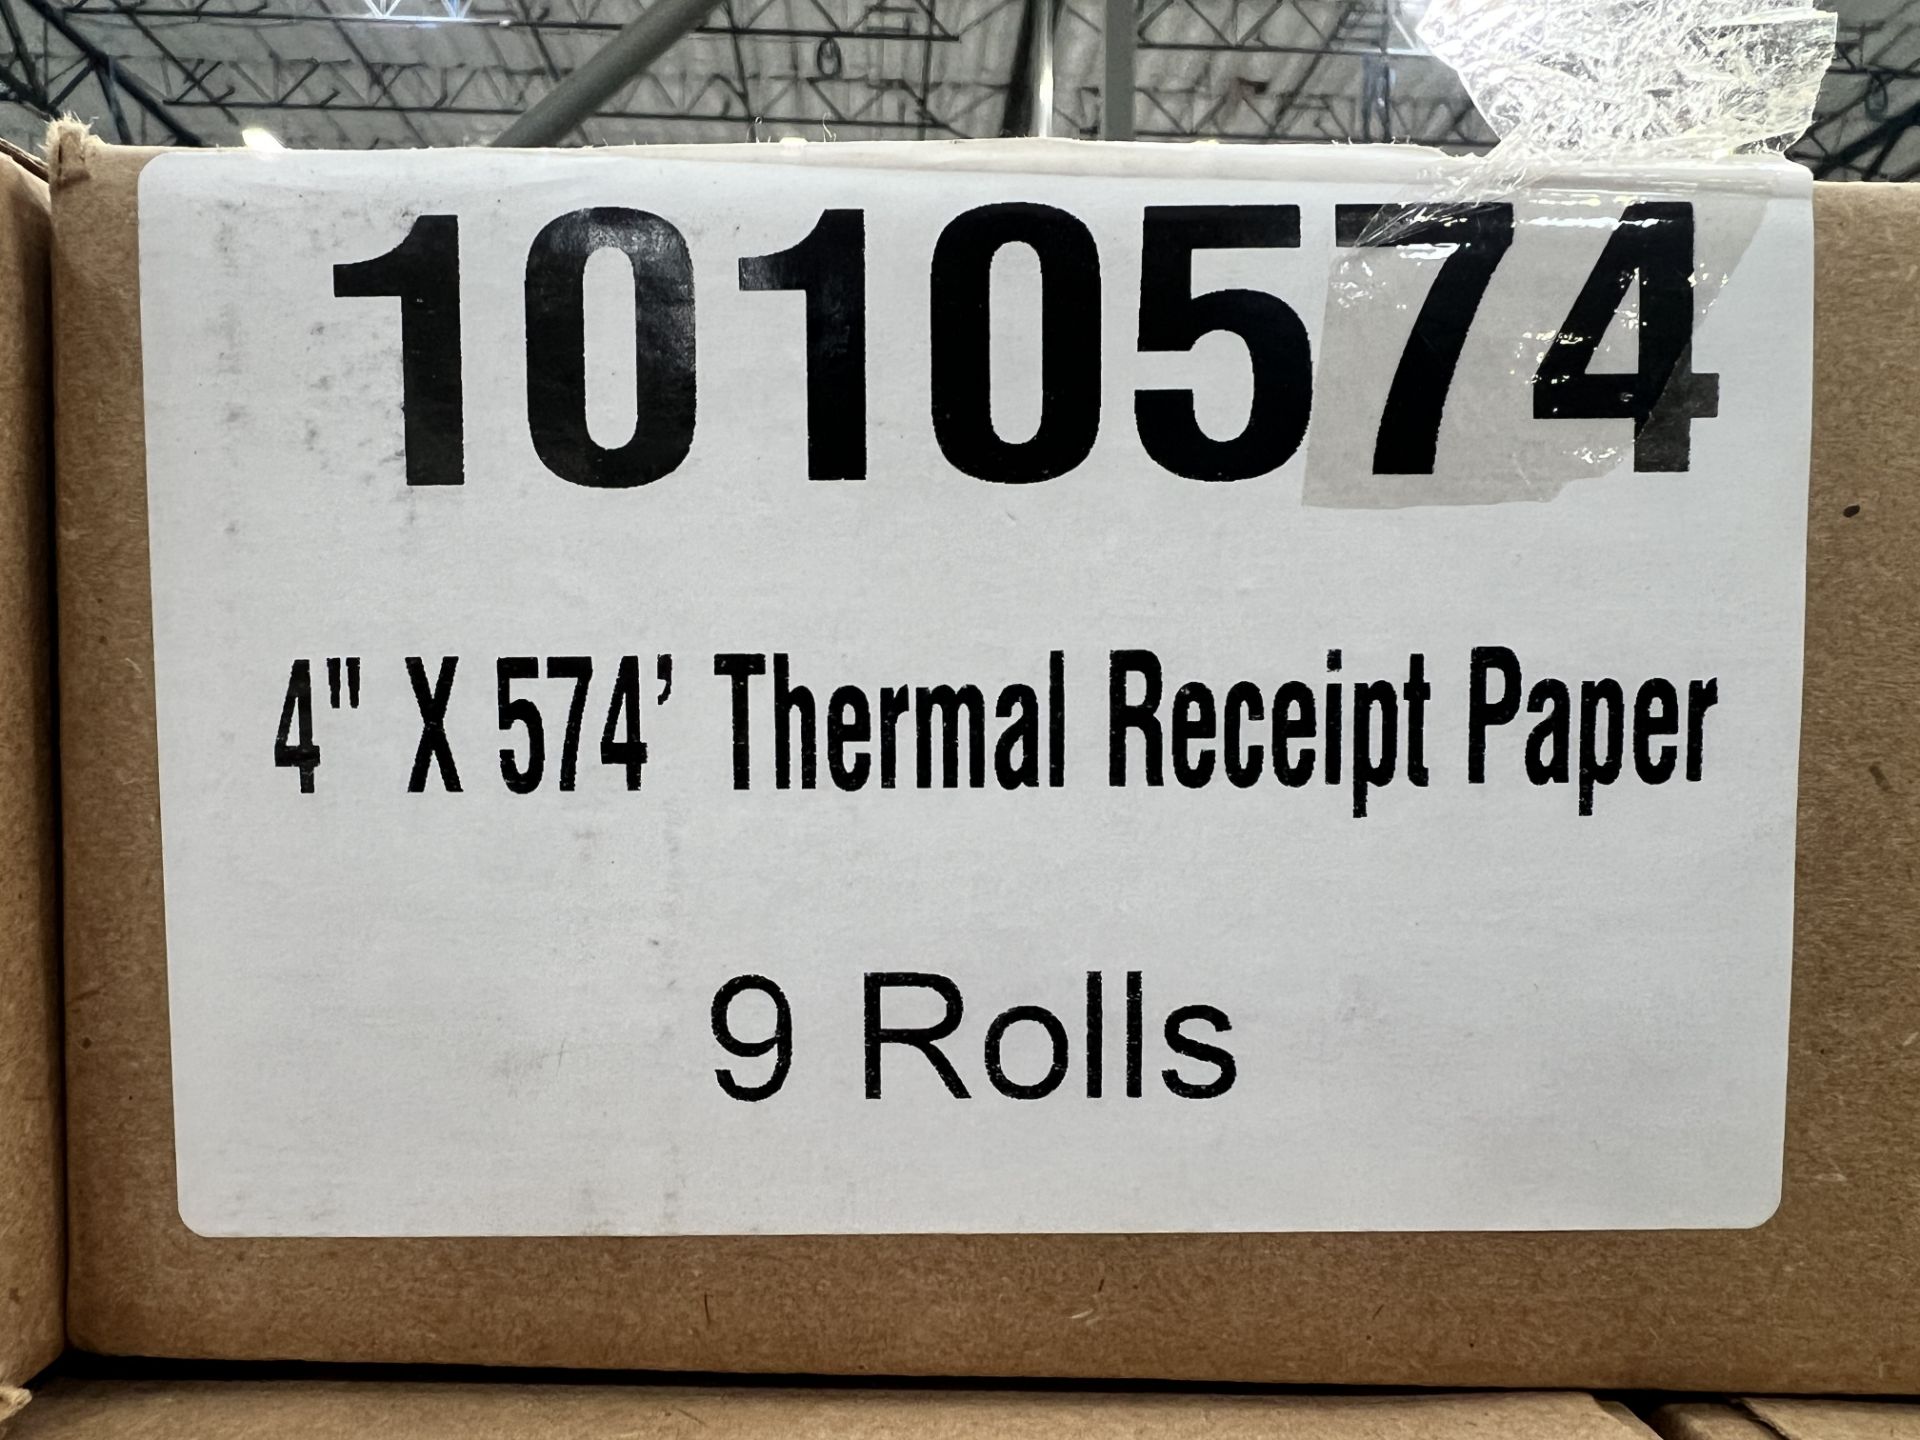 Thermal Receipt Paper 4" x 574' - Image 3 of 4